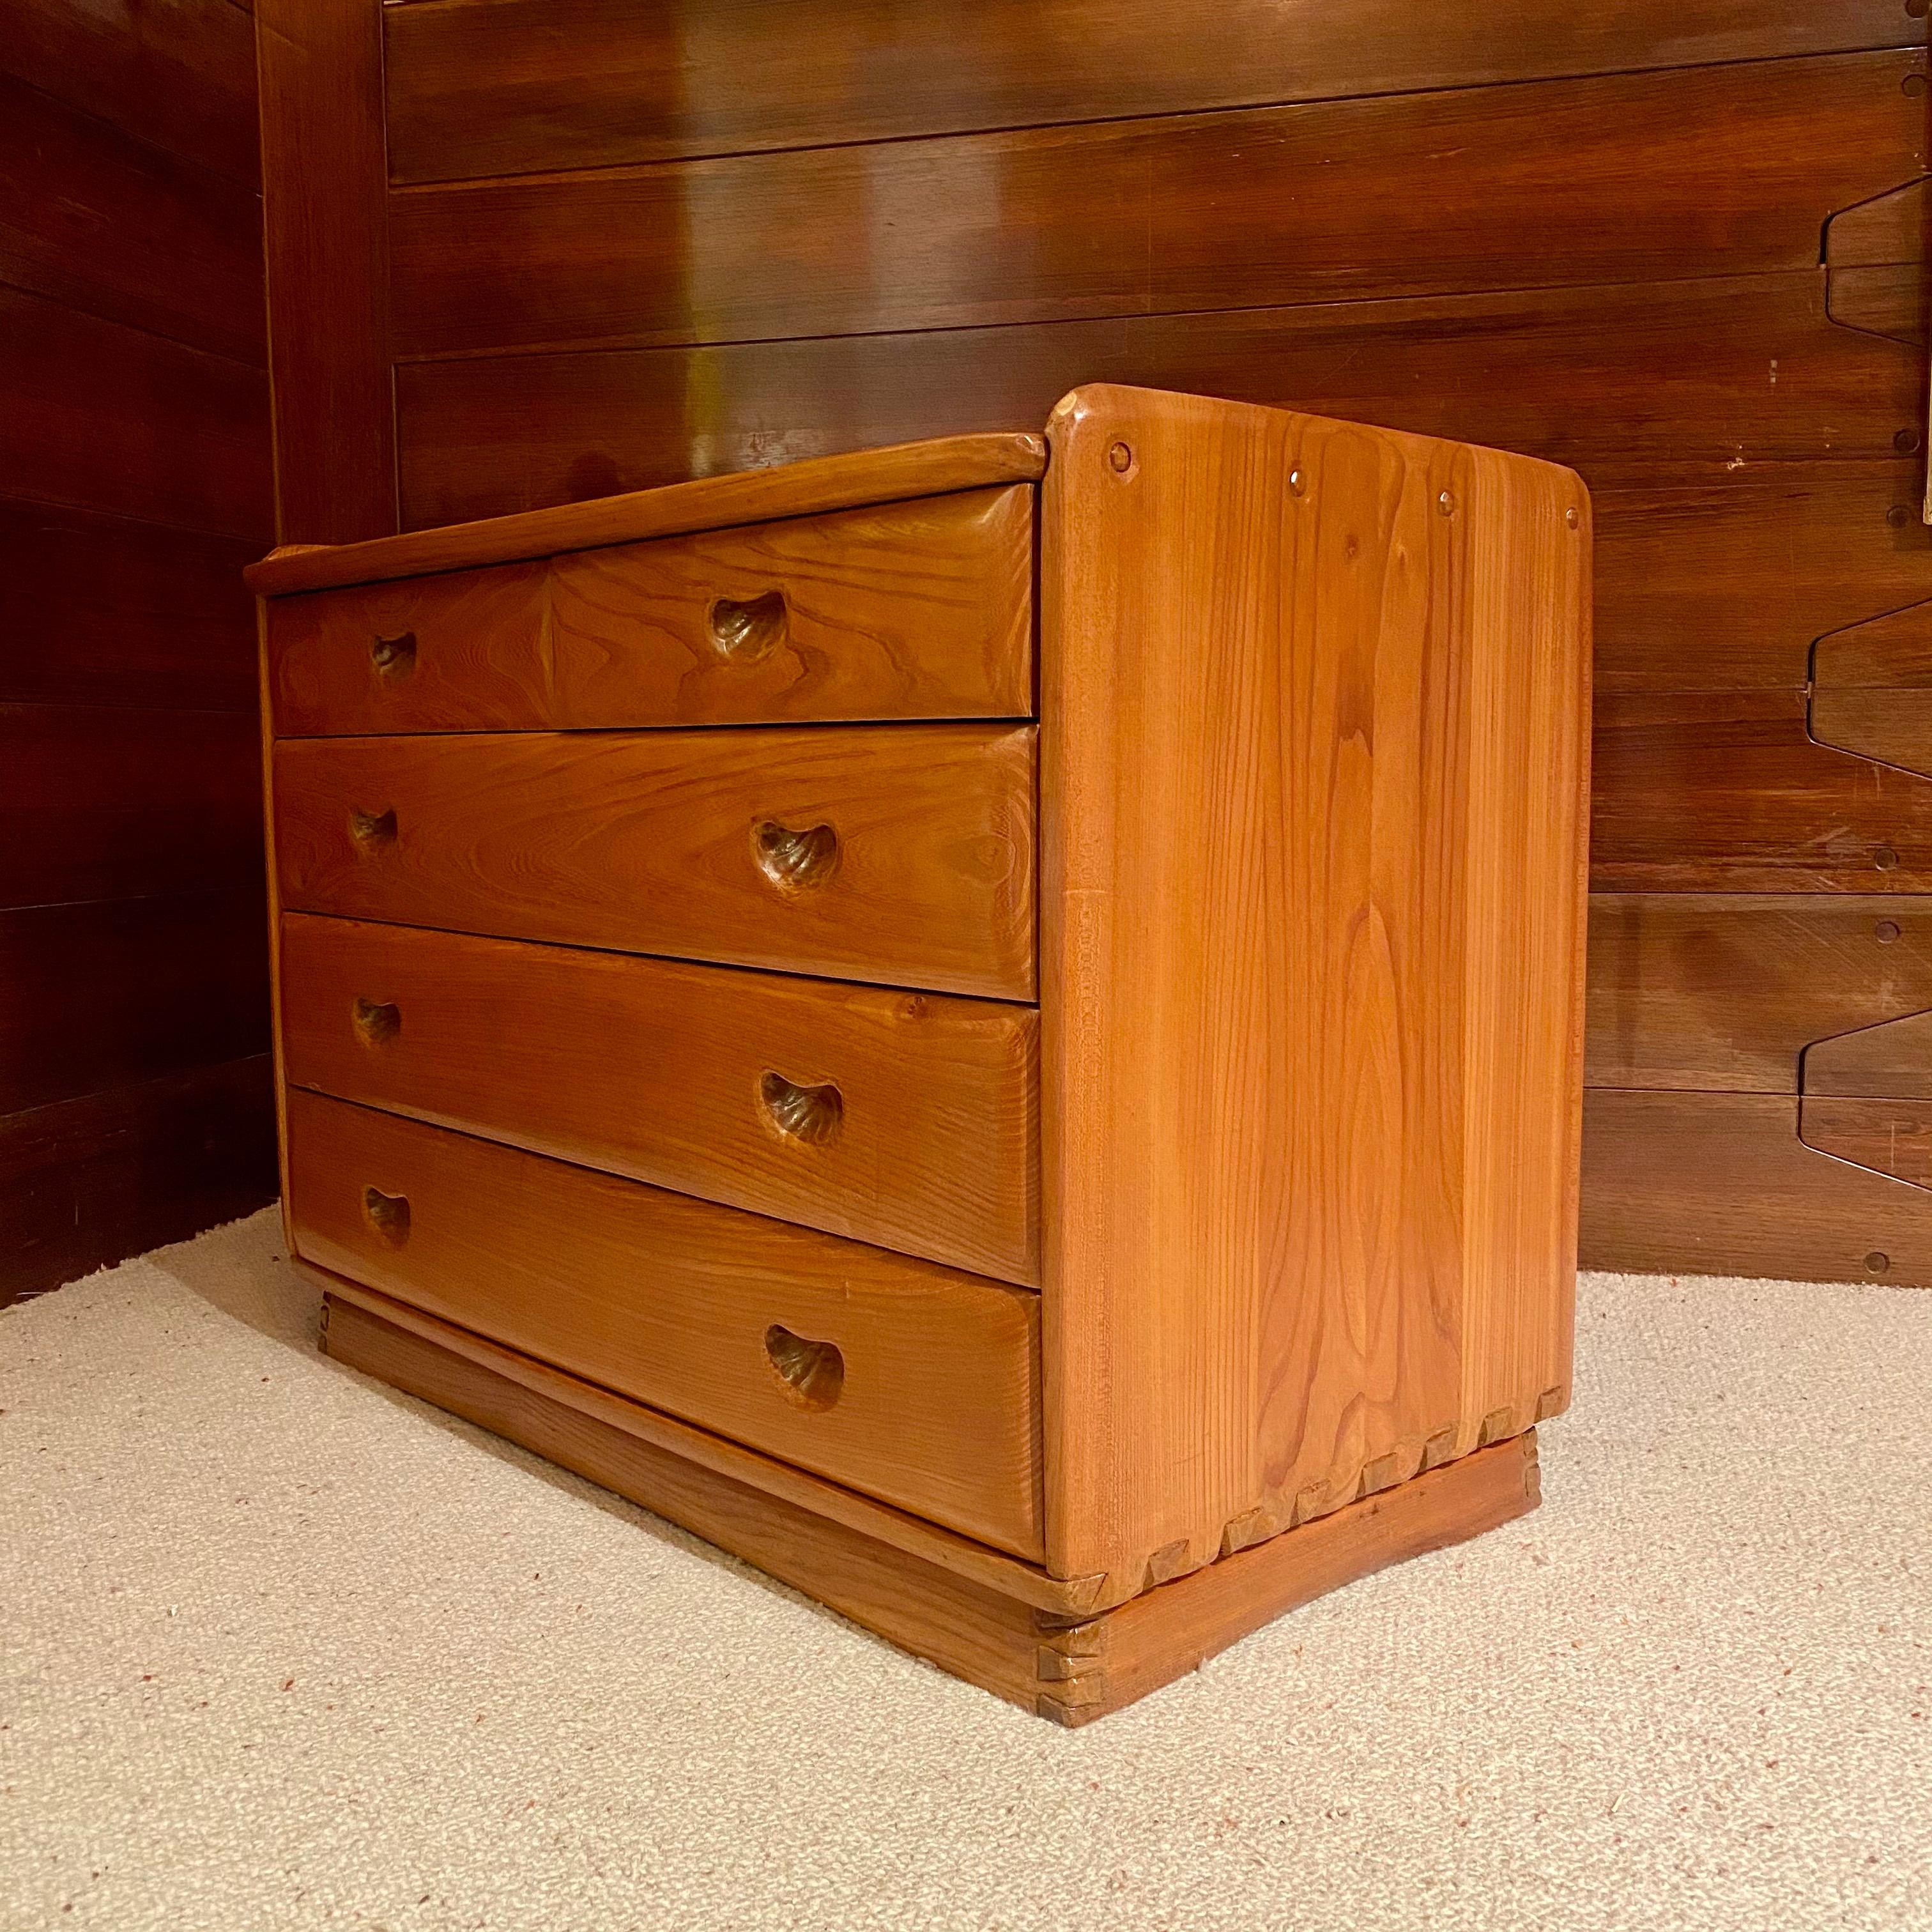 Chest of drawers in elm by the famous Swiss Cabinetmaker, Franz Xaver Sproll. Assembly work and carved details in the manner of Alexandre Noll, did in the same period.